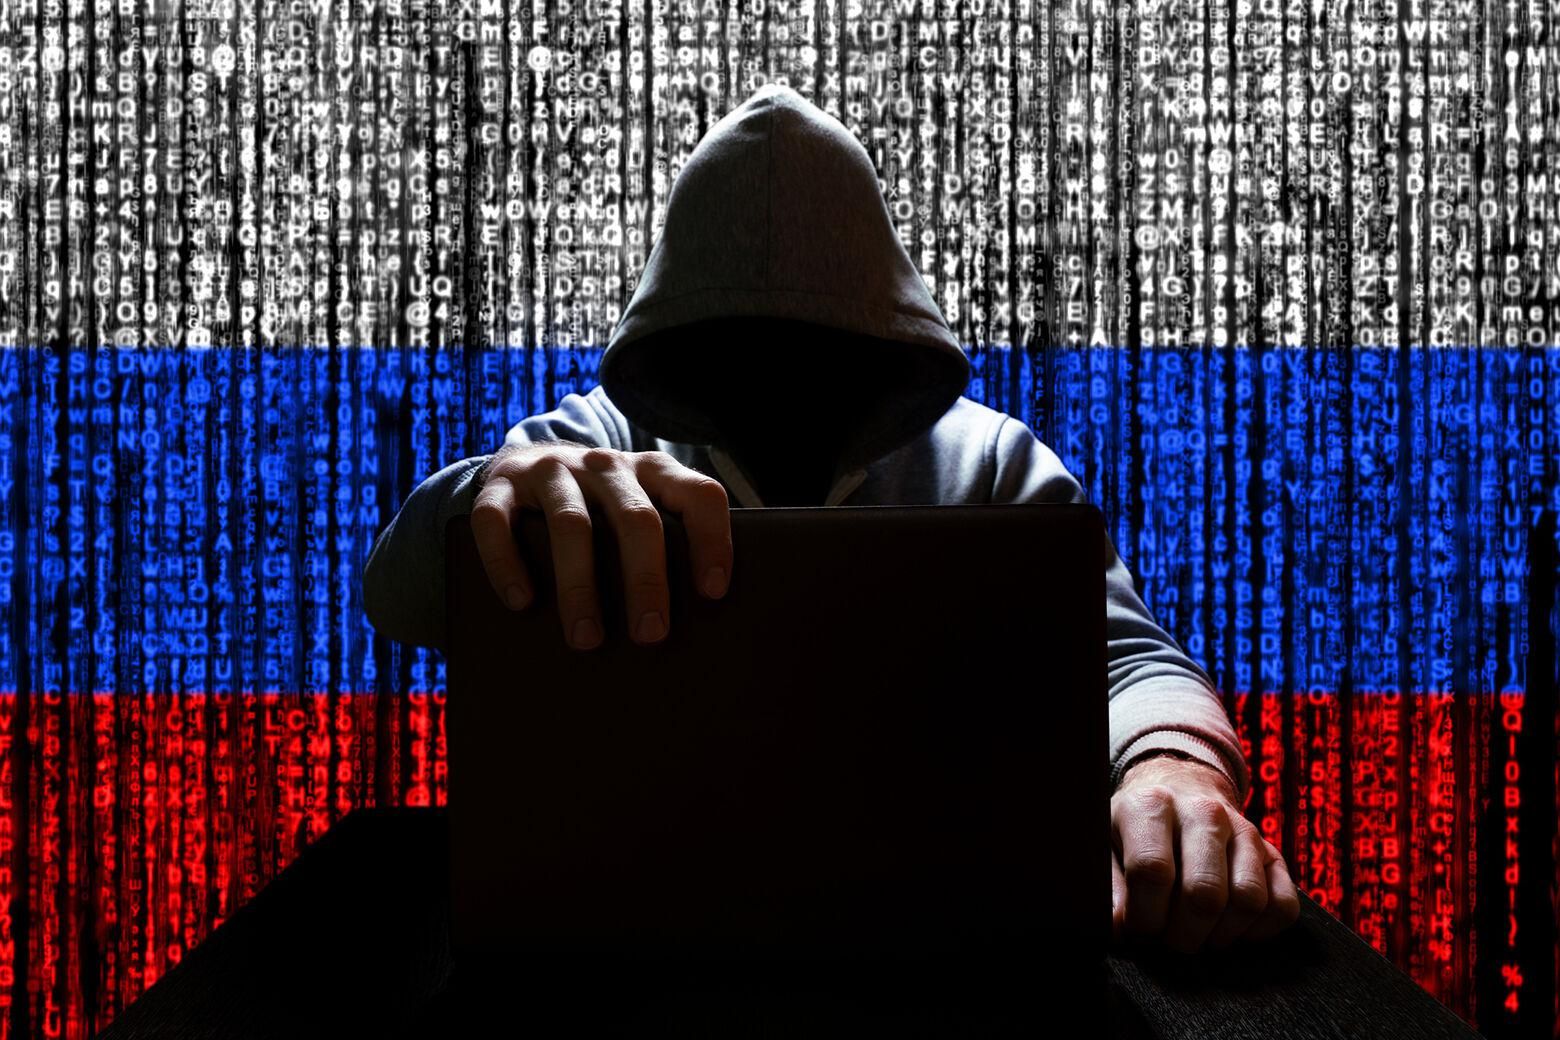 Hooded man with laptop on a background of the Russian flag in glitchy code